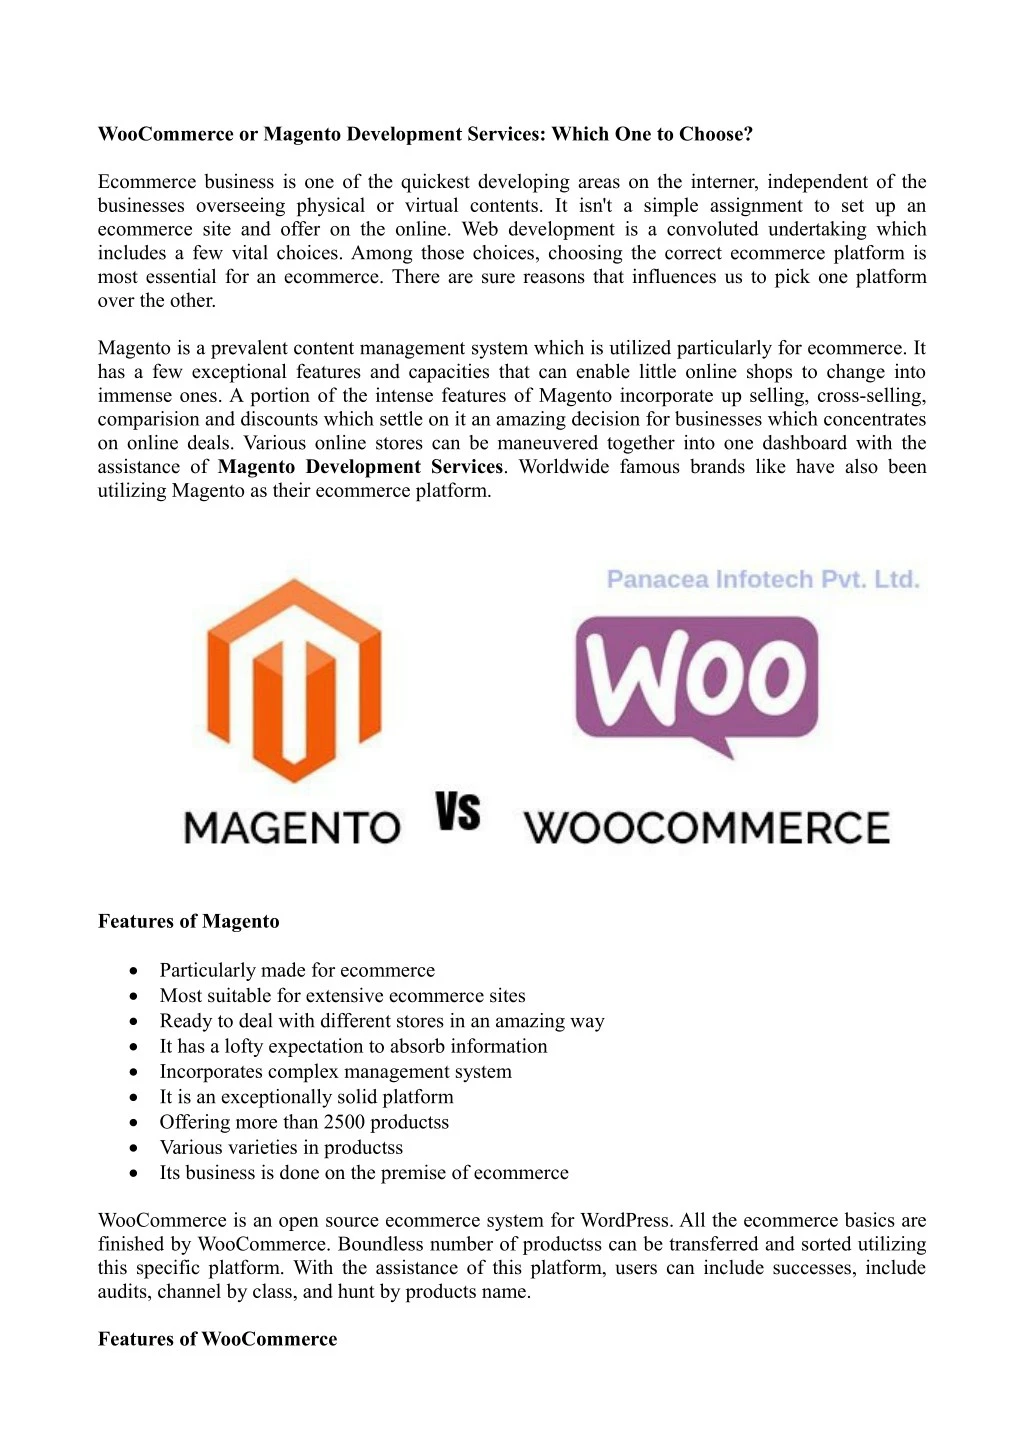 woocommerce or magento development services which